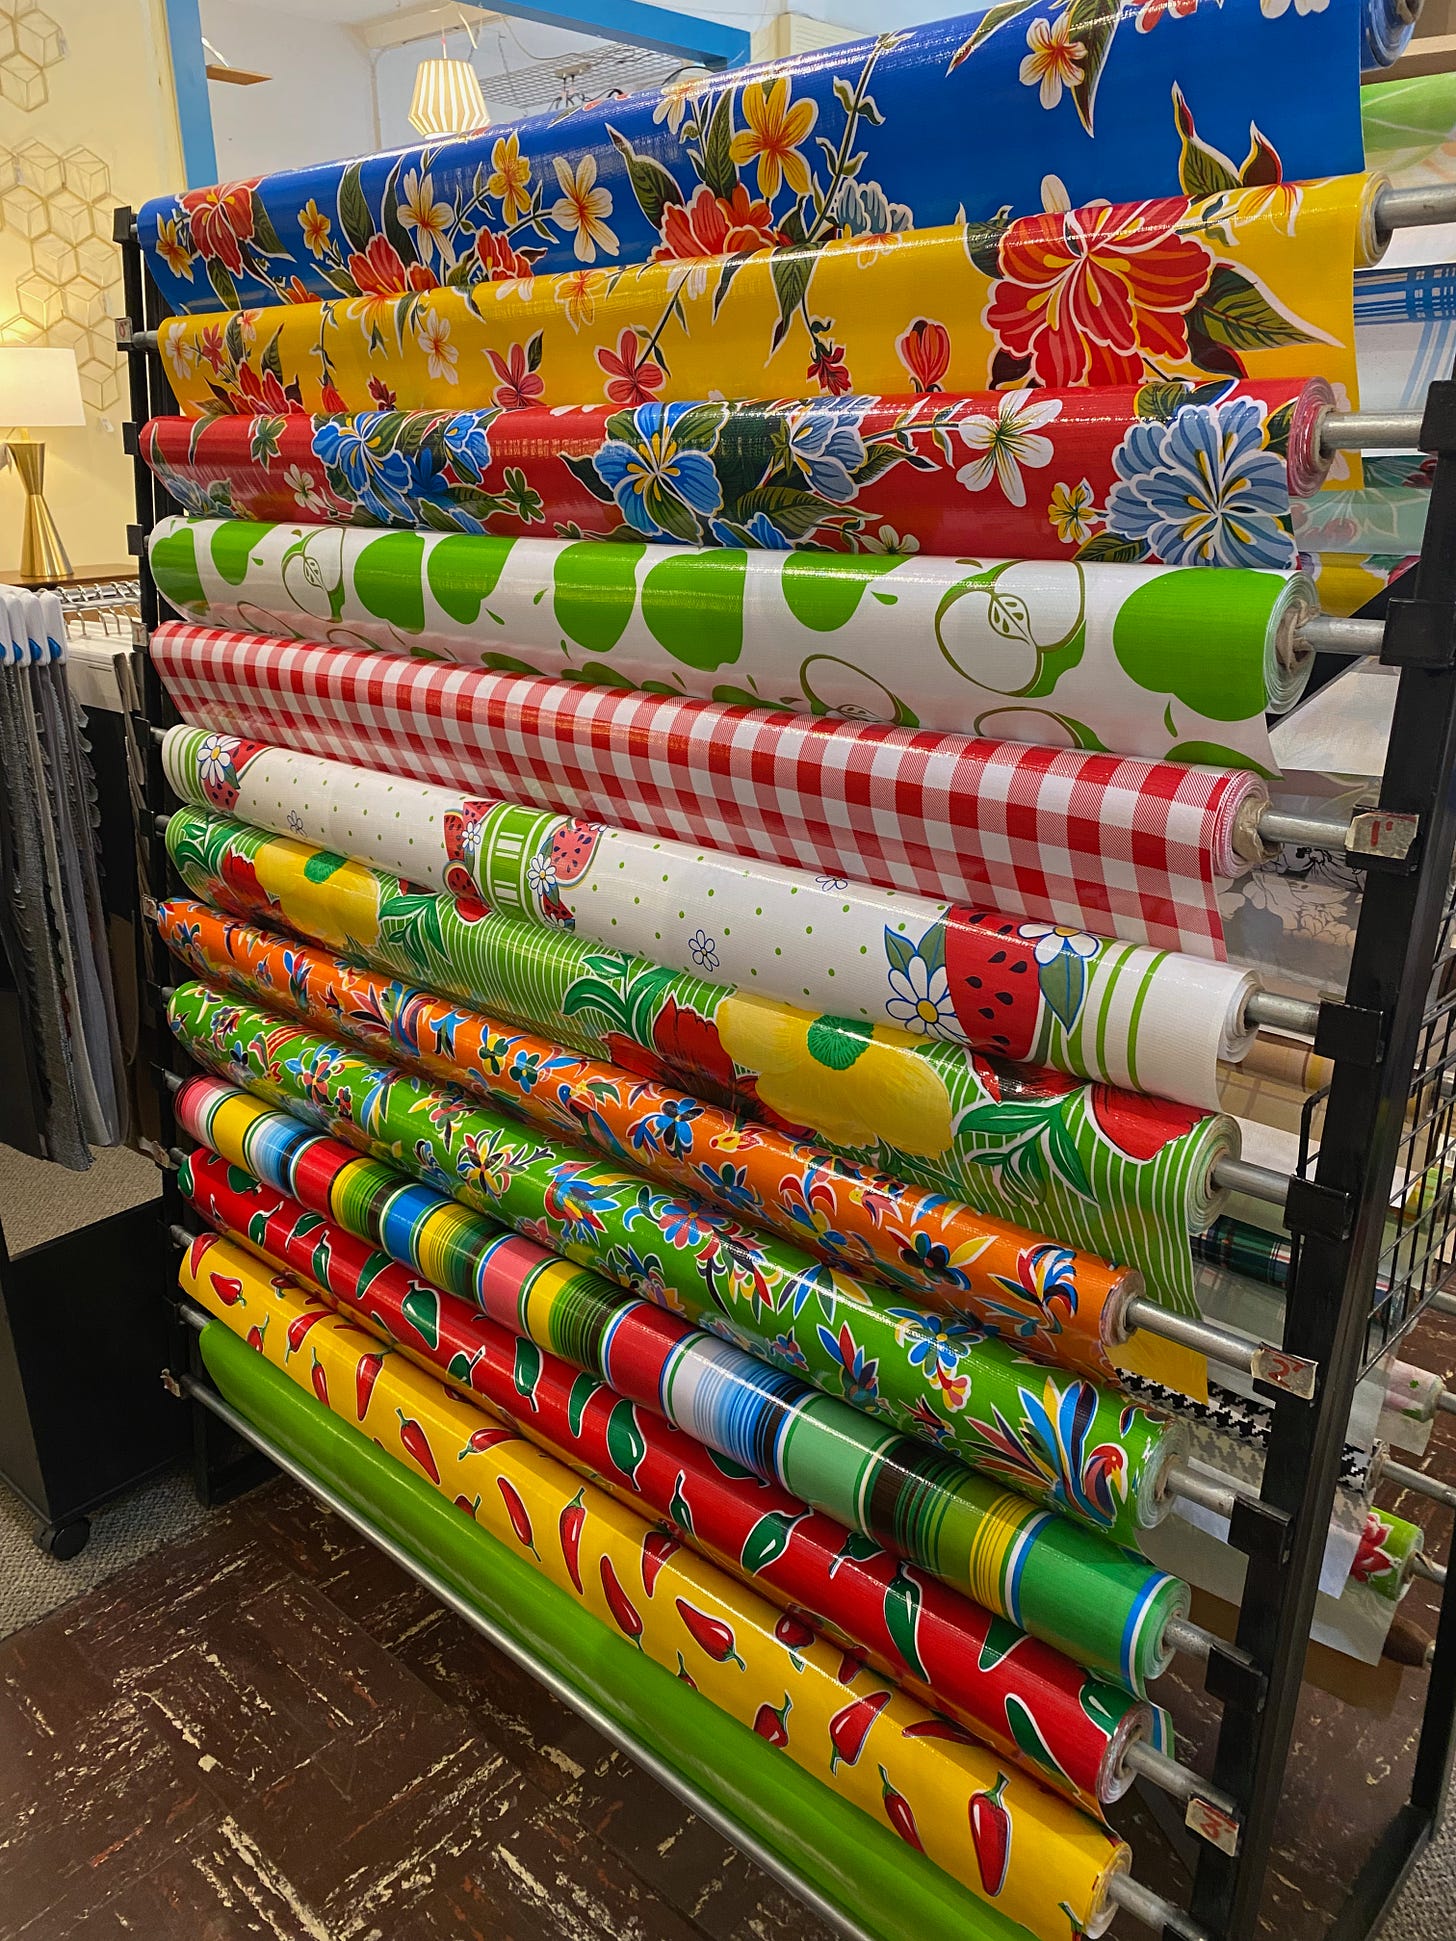 More than a dozen rolls of colorful oilcloth on a rack in a home furnishings store in Portland, Oregon. 